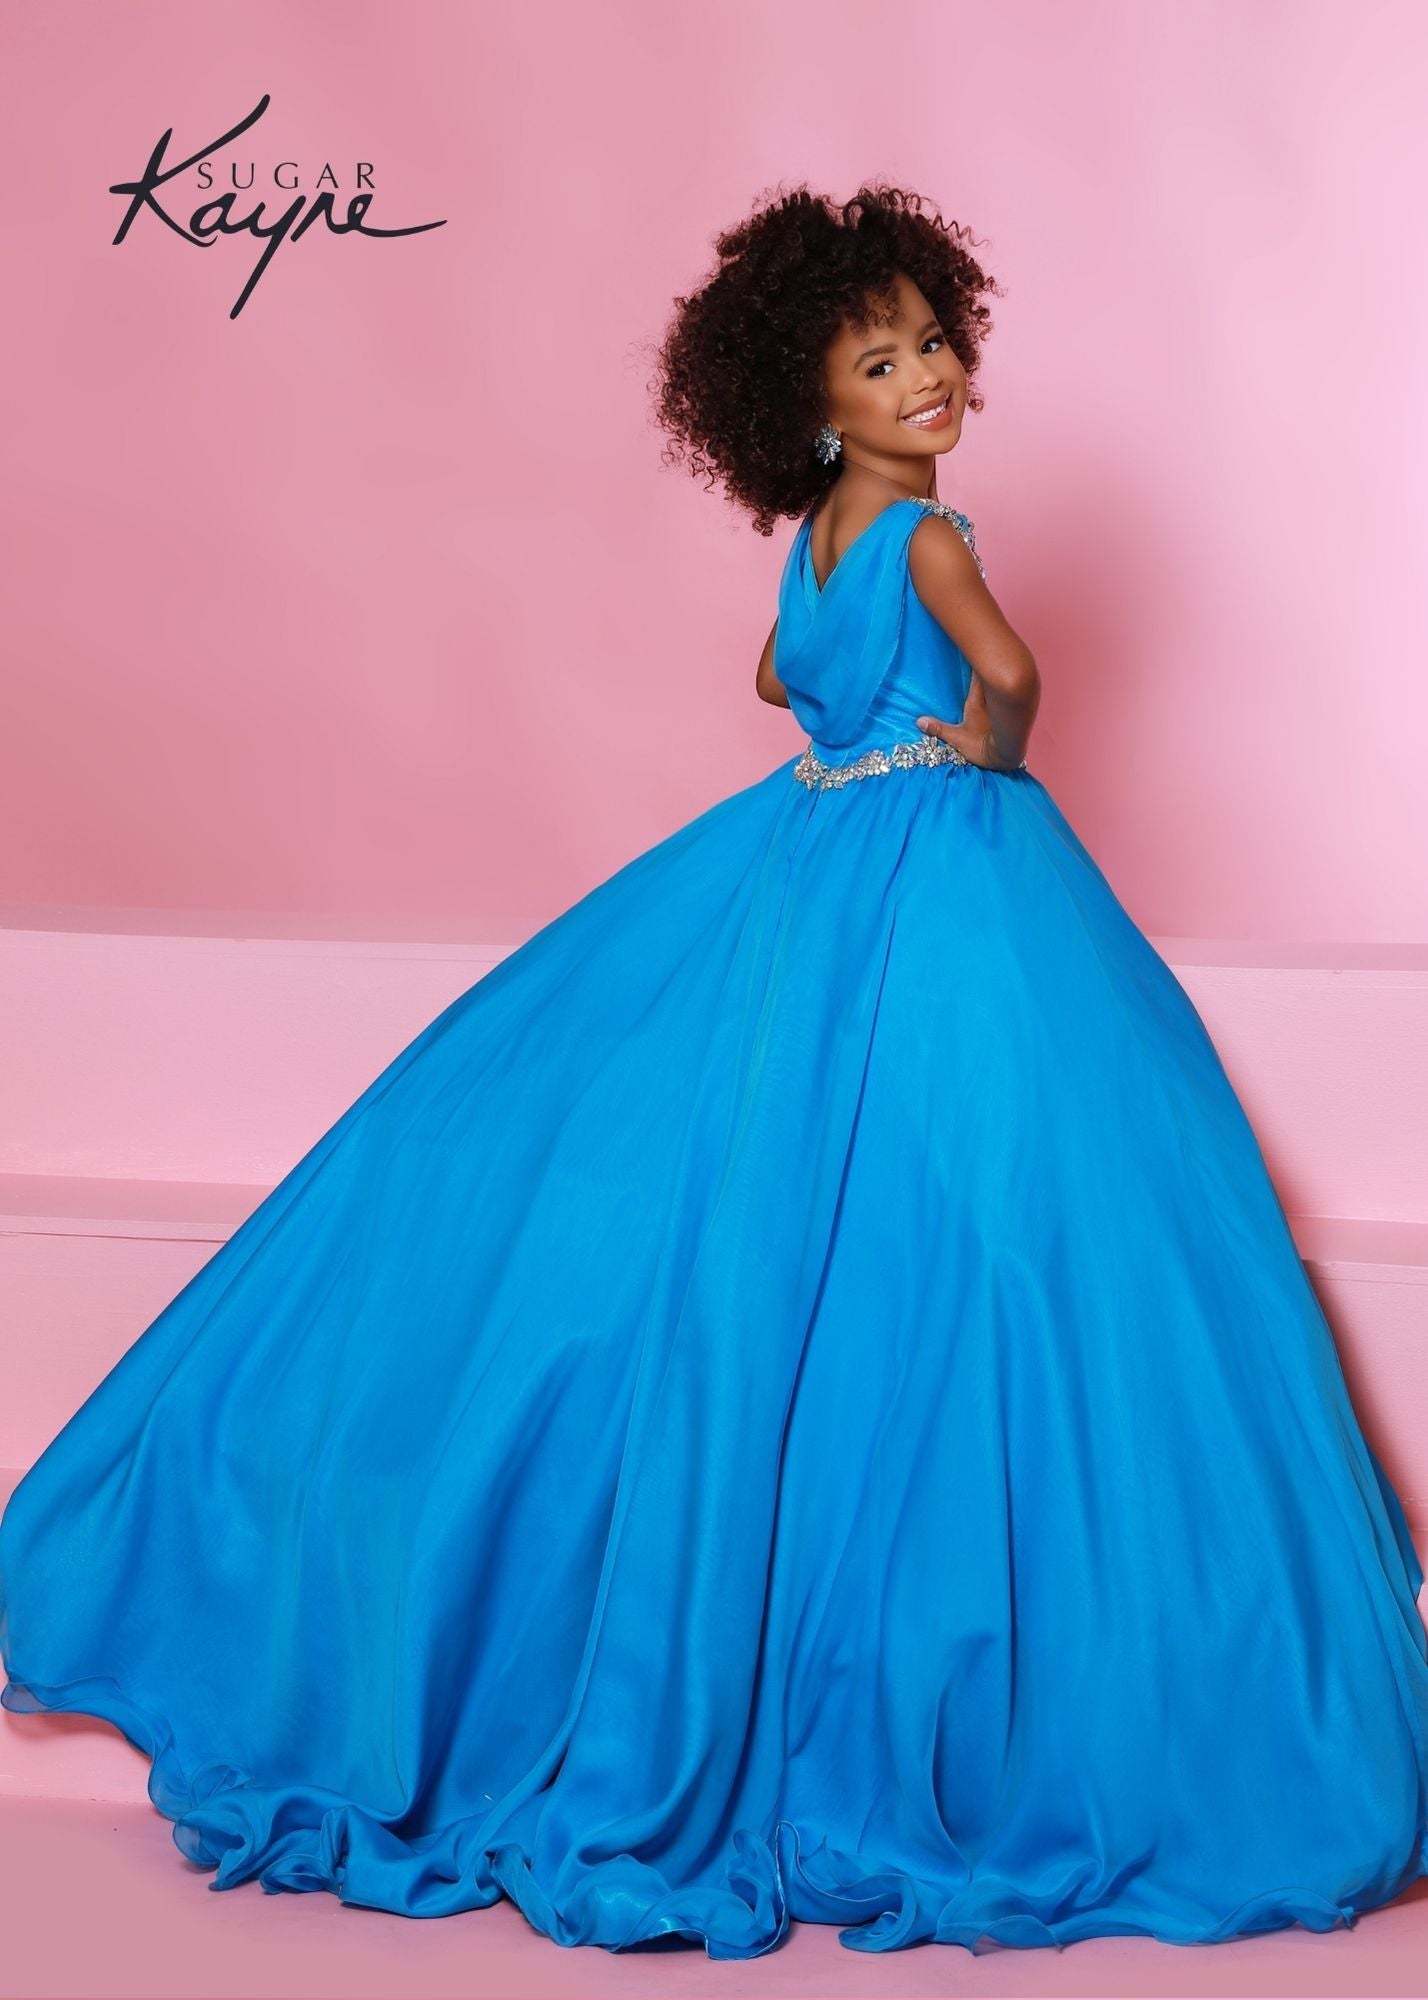 Sugar-Kayne-C192-Electric-Blue-Girls-and-Preteen_s-pageant-dress-high-neckline-cap-sleeves-Cowl-scoop-back-chiffon-long-skirt